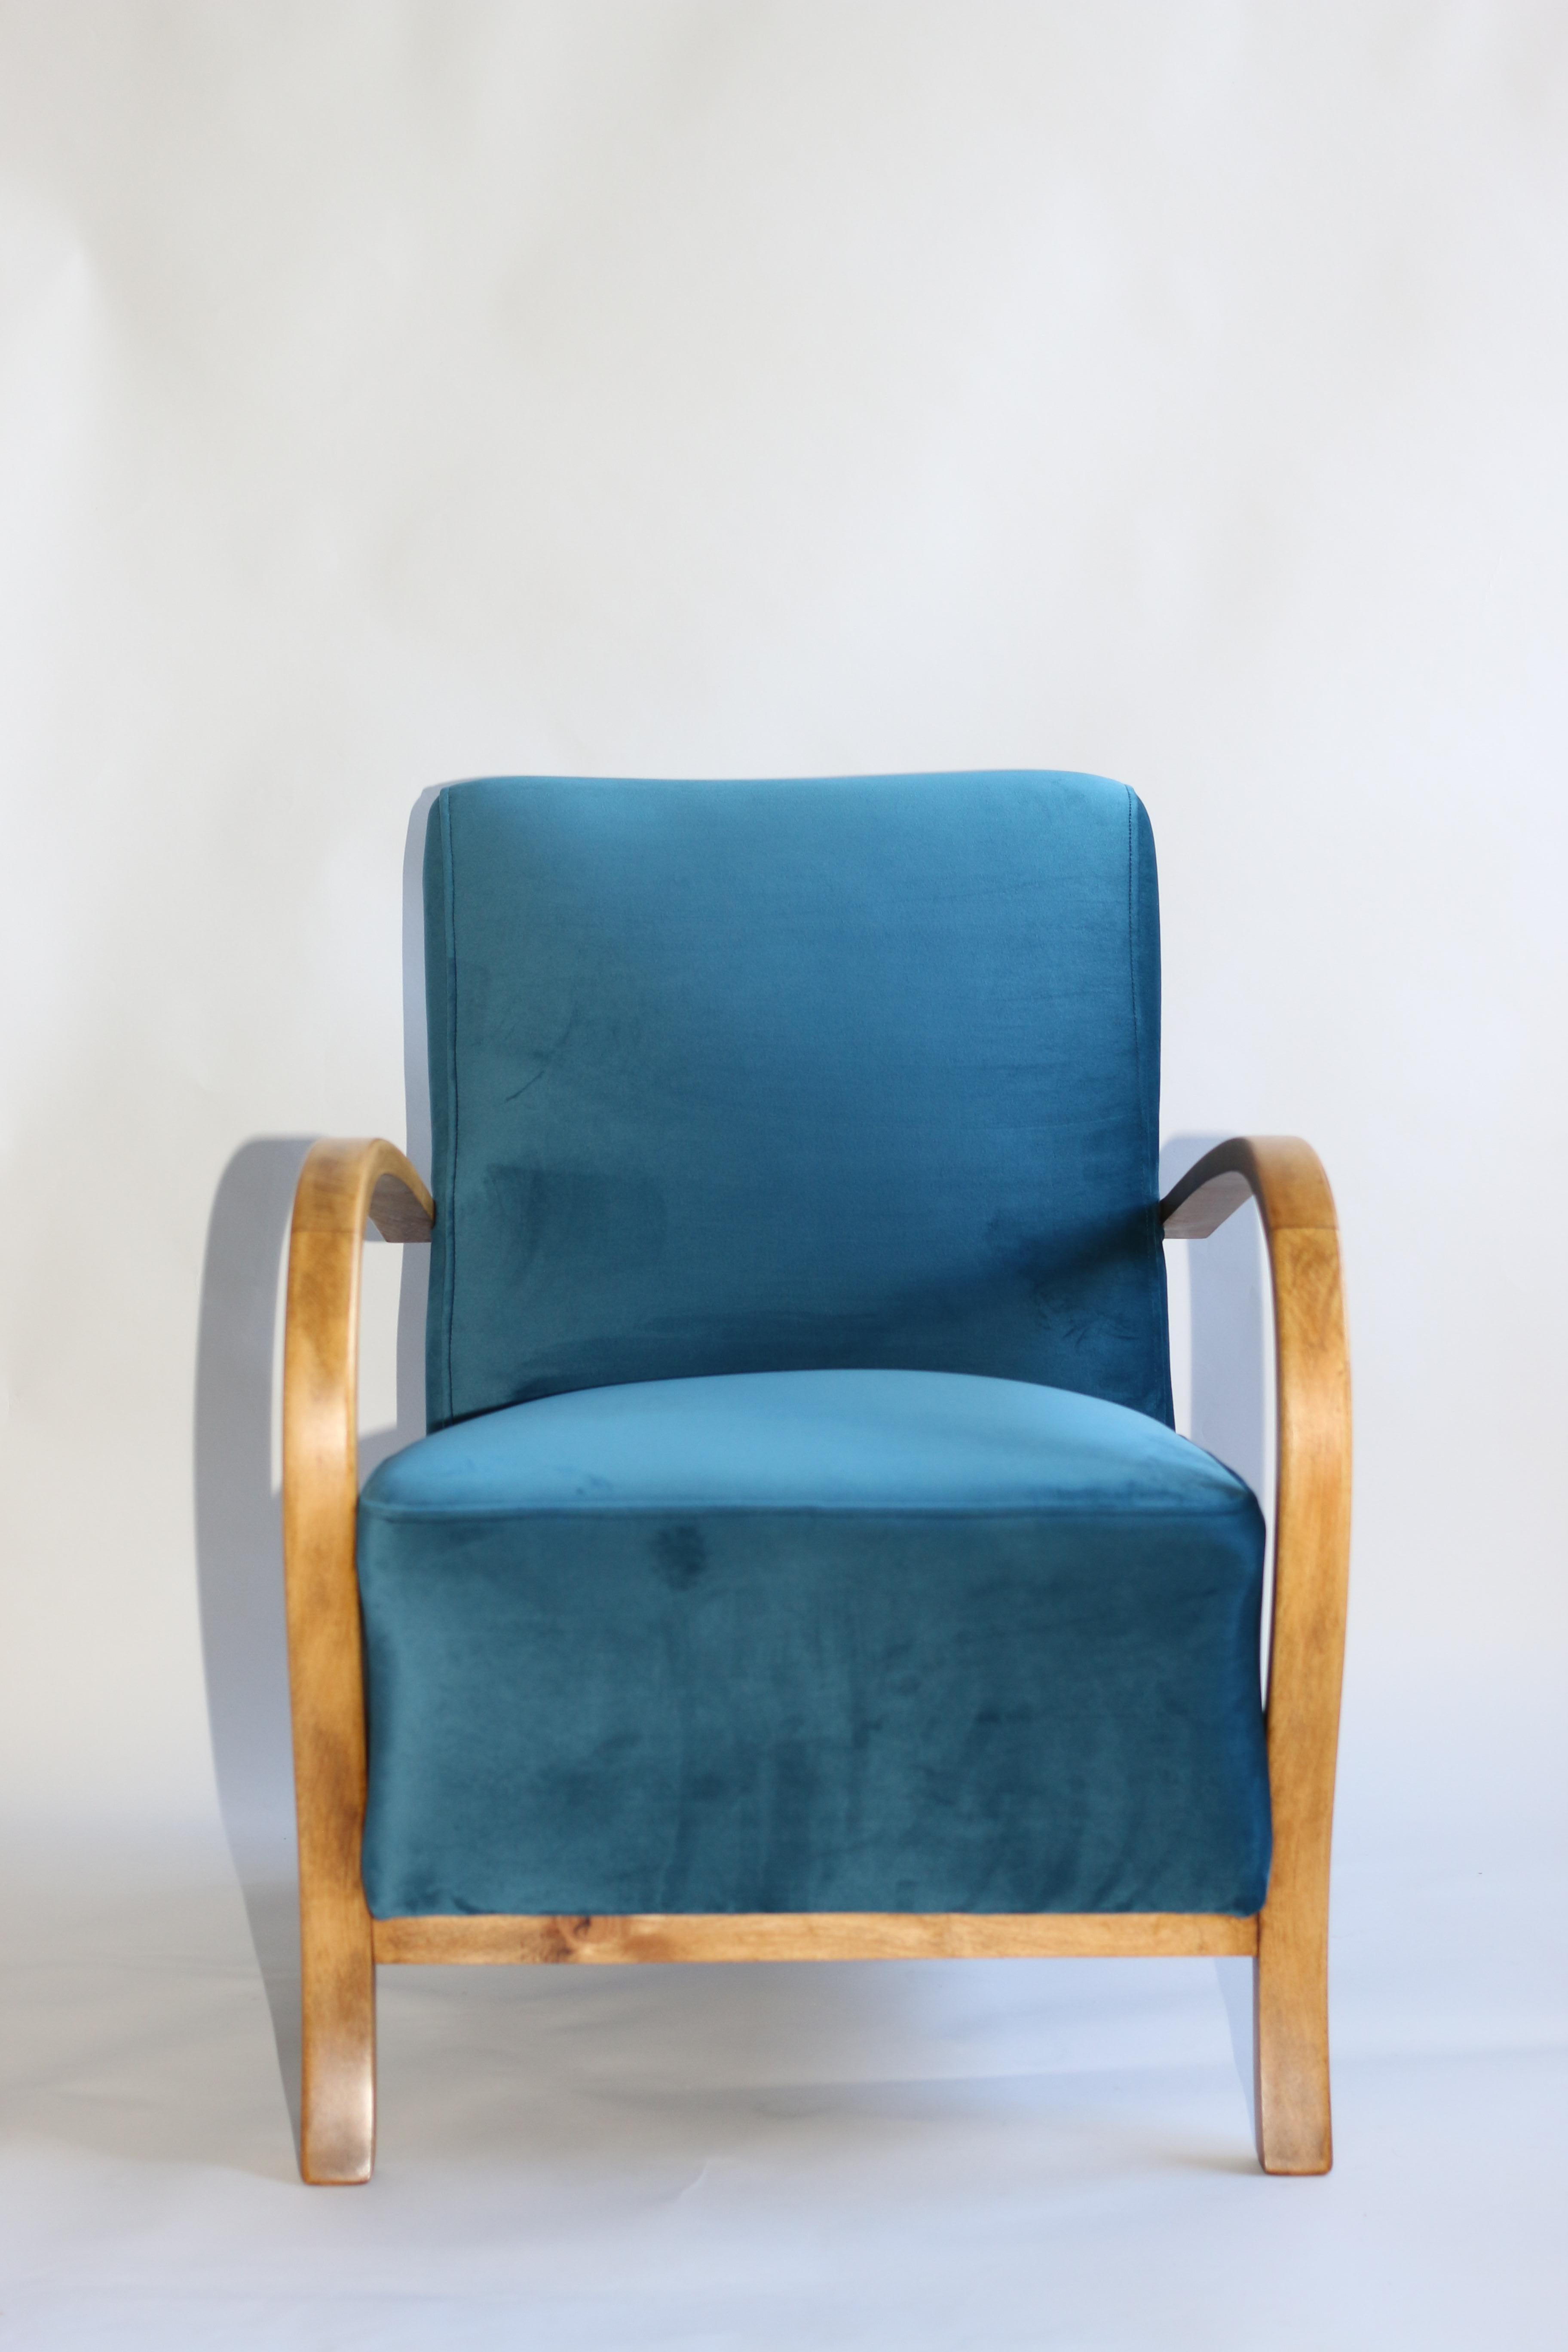 Restored Art Deco armchair in blue marine velvet from 1960s, new upholstery covered with velvet fabric in fashionable blue color, finished with wooden chair cushion. Wooden elements in antic wood color and beech tree. Perfect